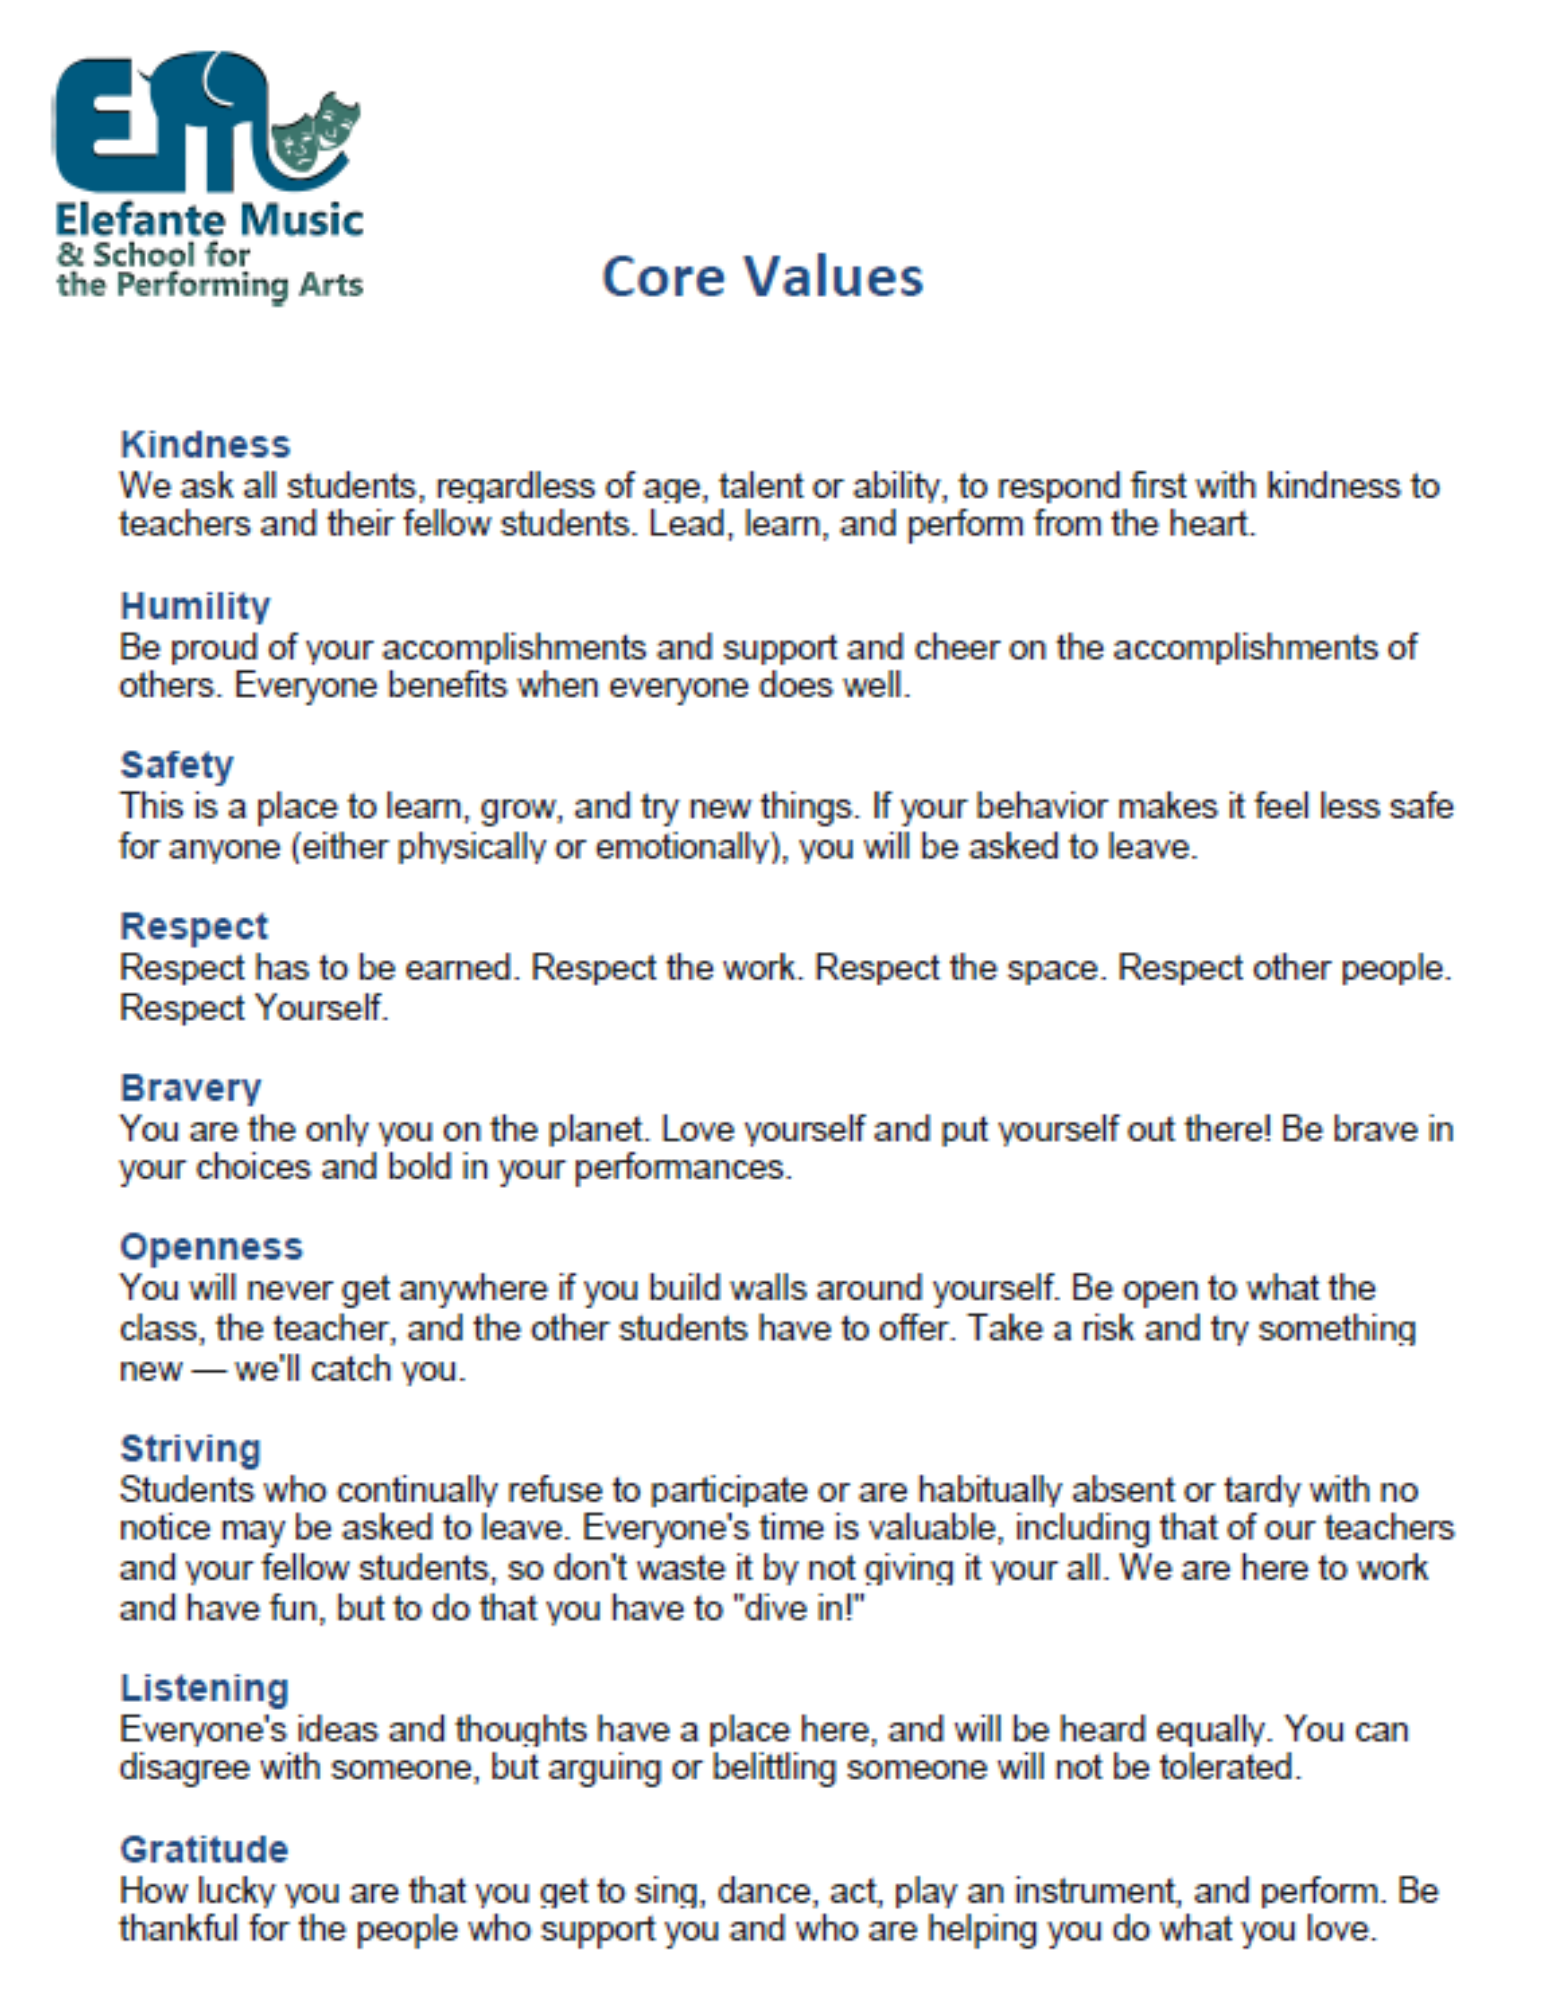 Code of Conduct and Core Values – Elefante Music & School for the  Performing Arts